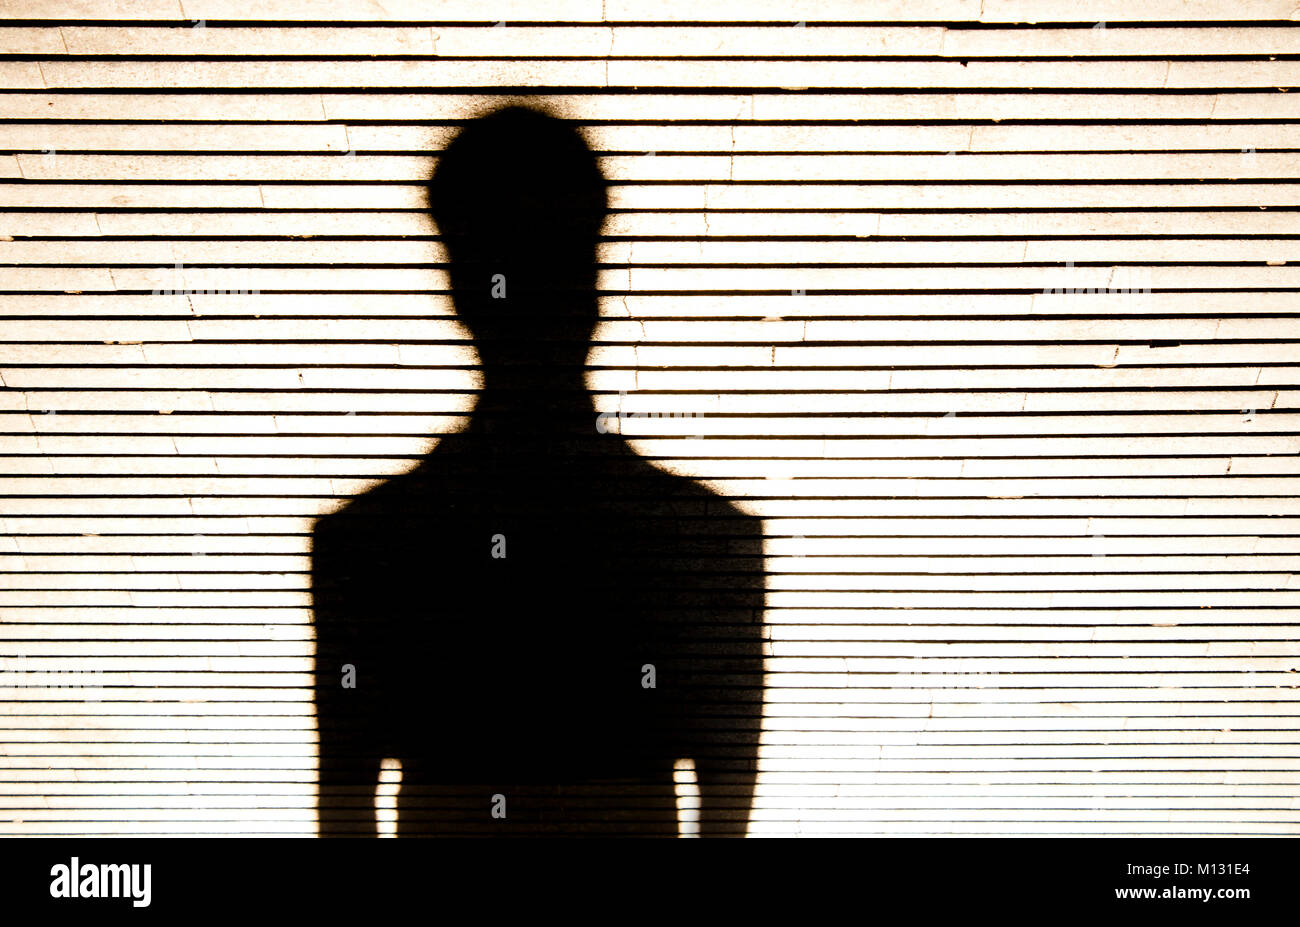 Anonymous person portrait silhouette in black and white on patterned background Stock Photo